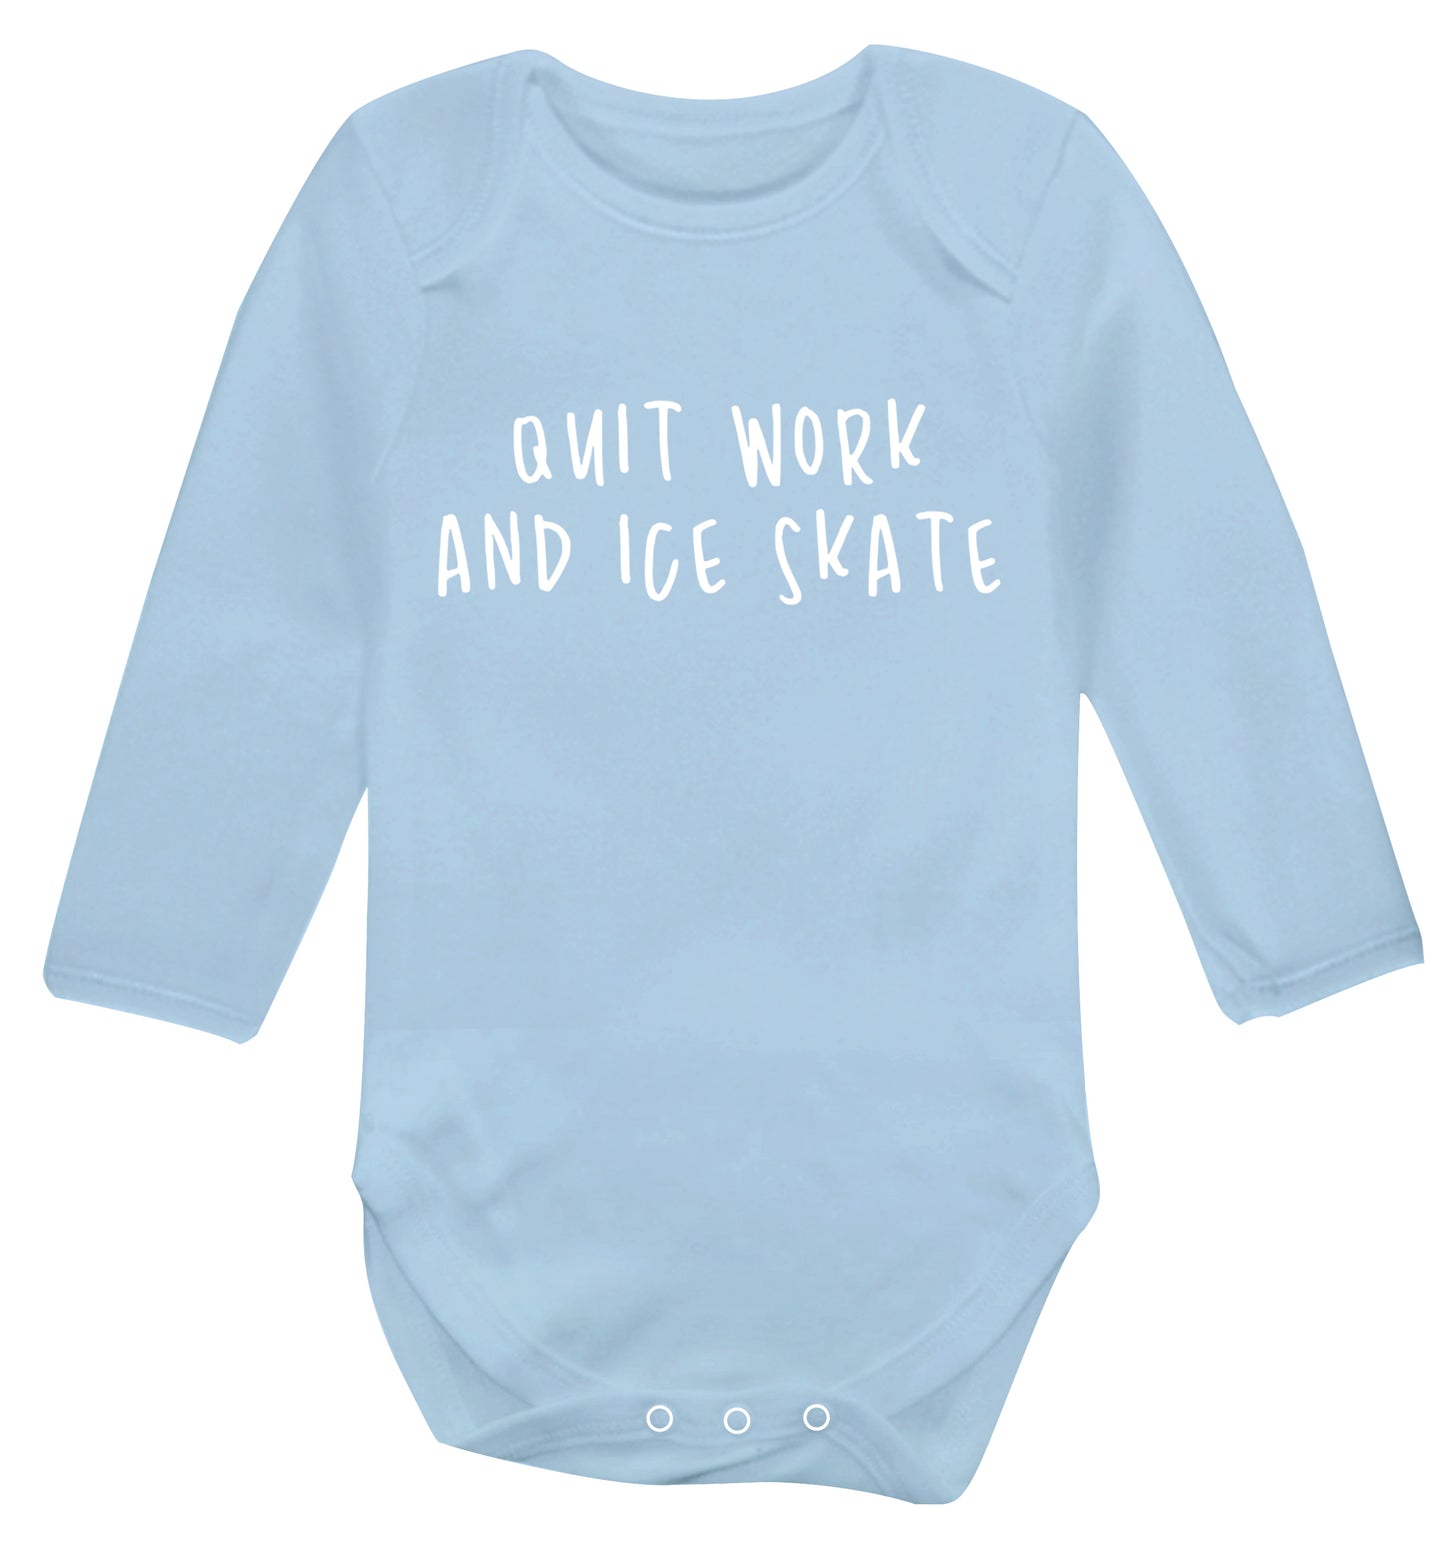 Quit work ice skate Baby Vest long sleeved pale blue 6-12 months